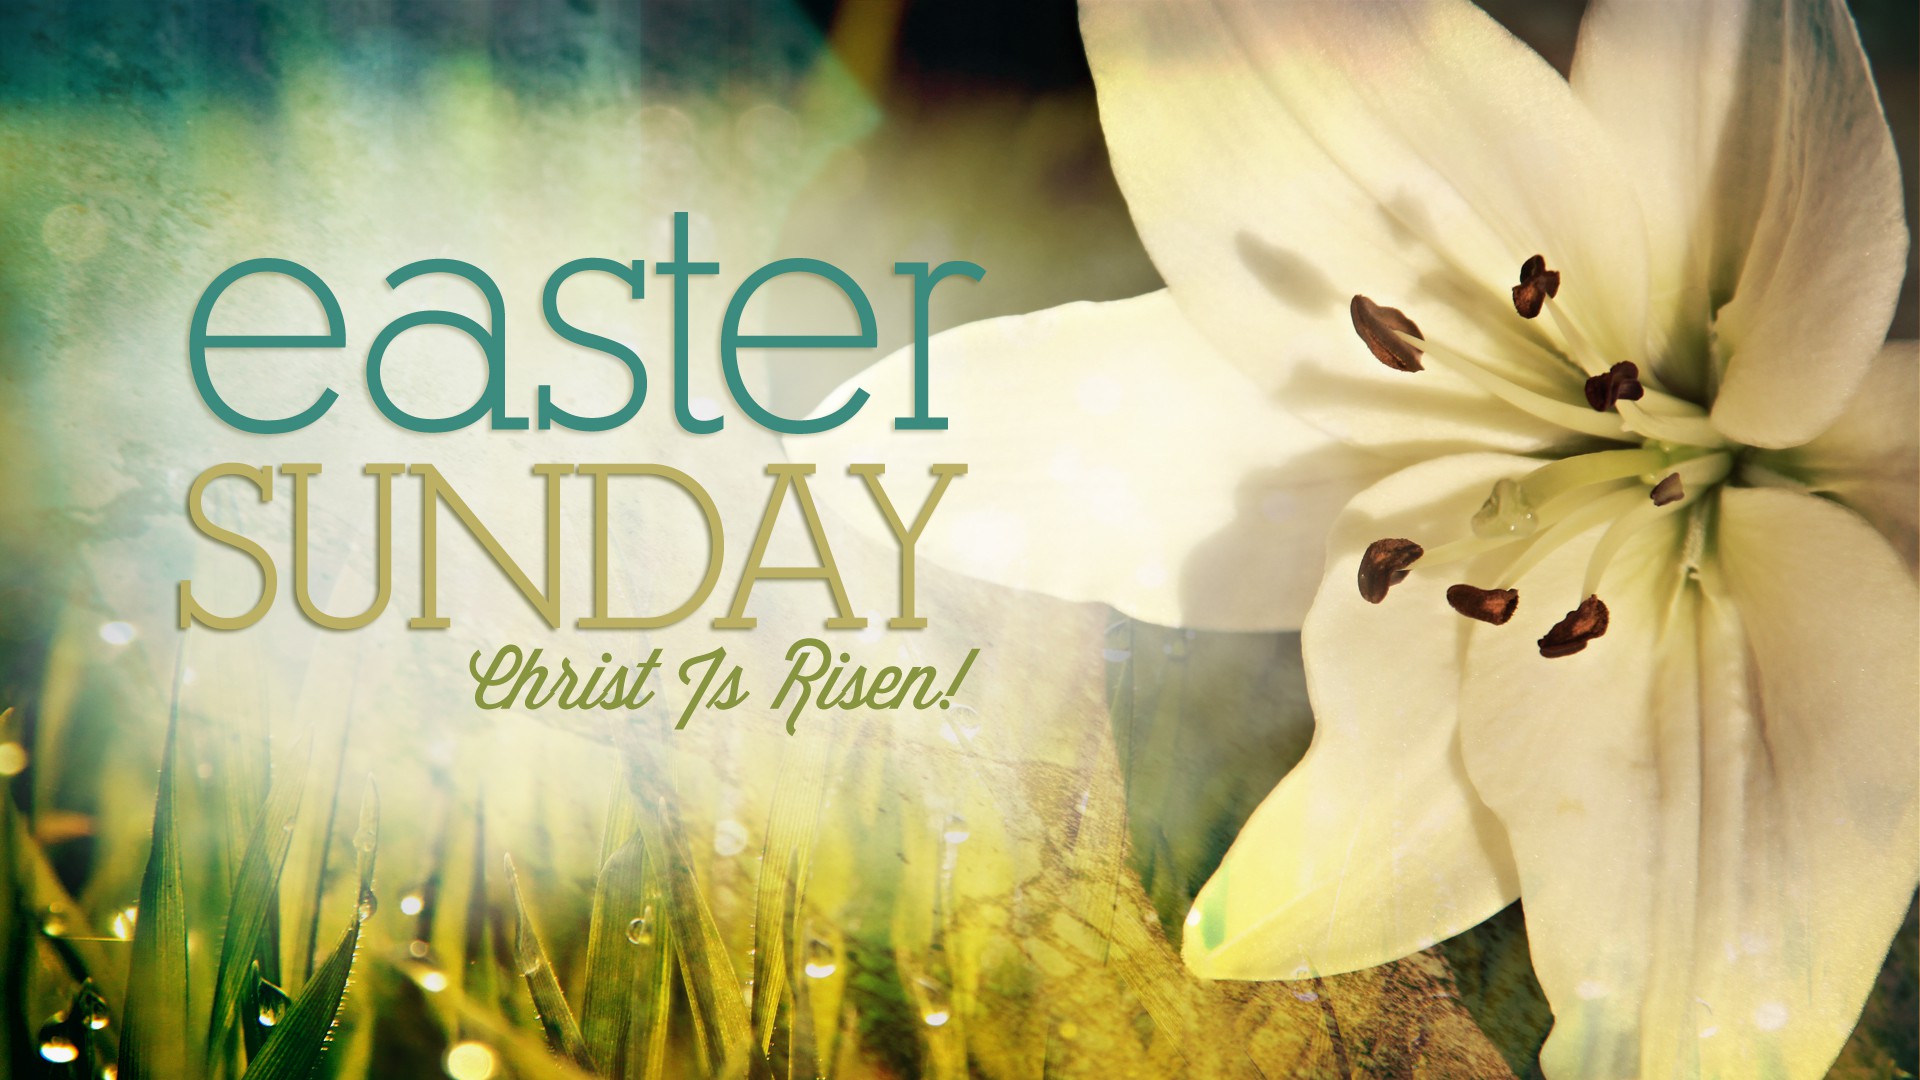 Easter Sunday Free Awesome Image For Mobile